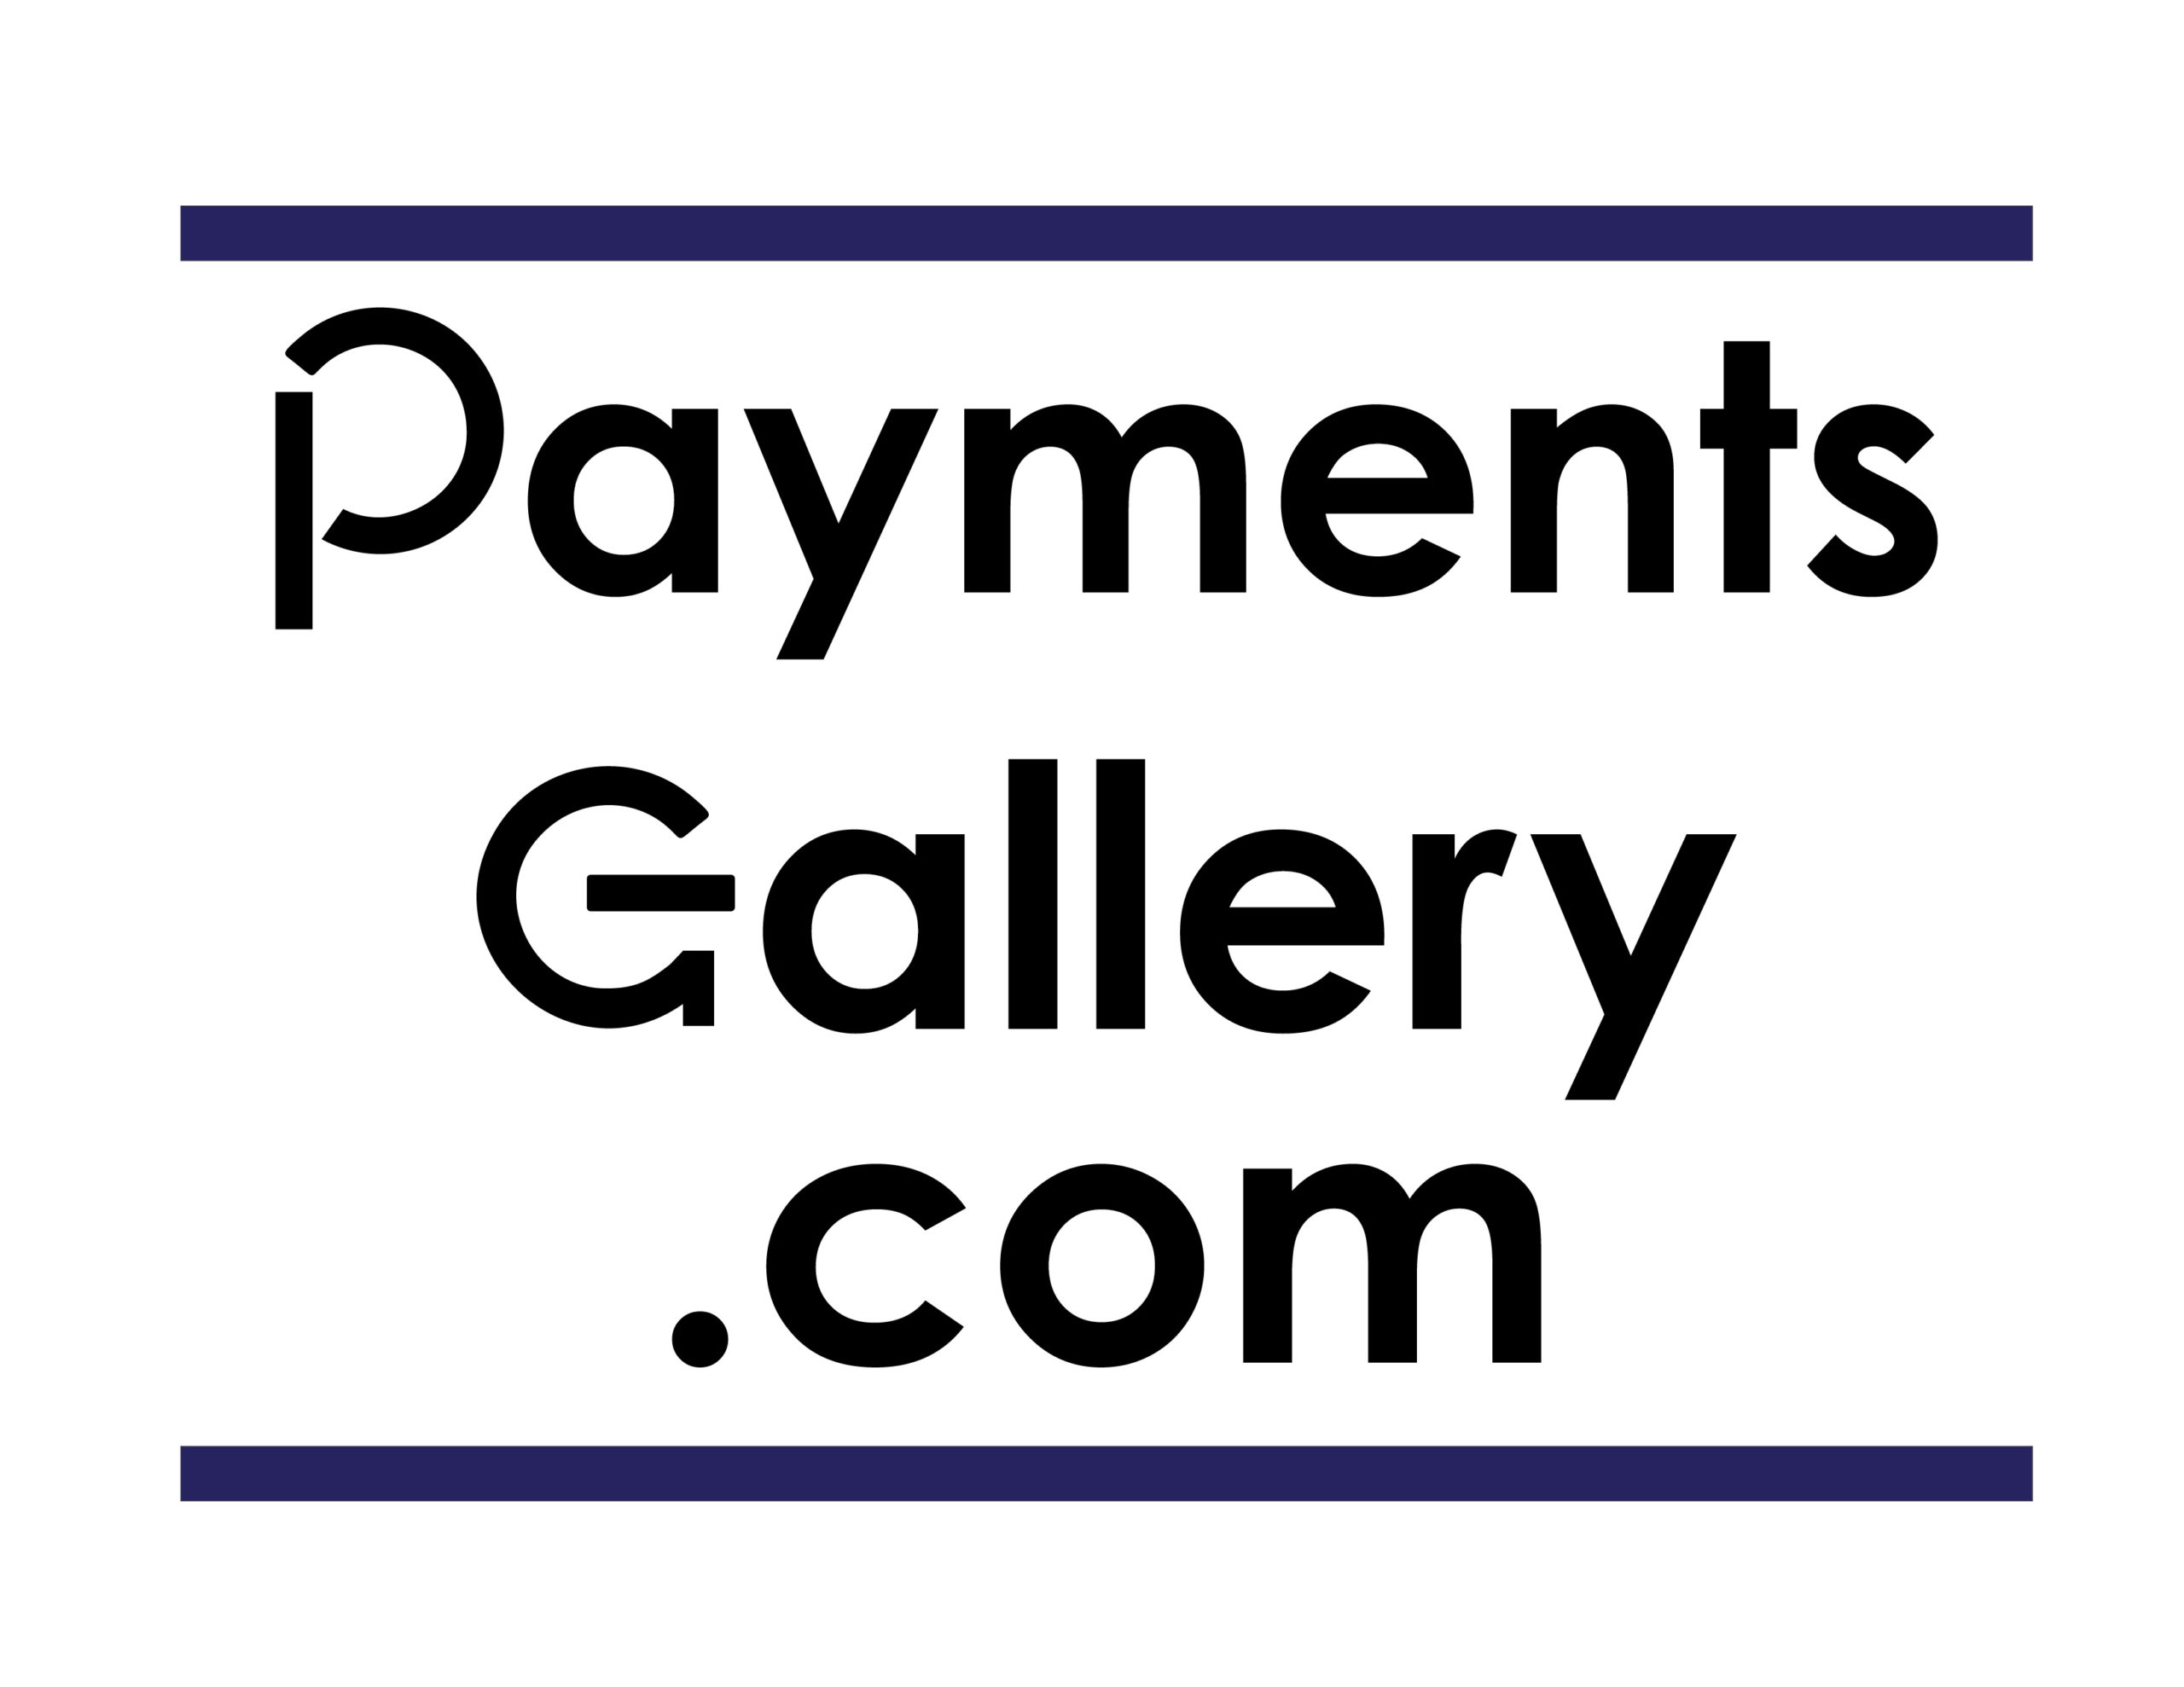 Payments Gallery